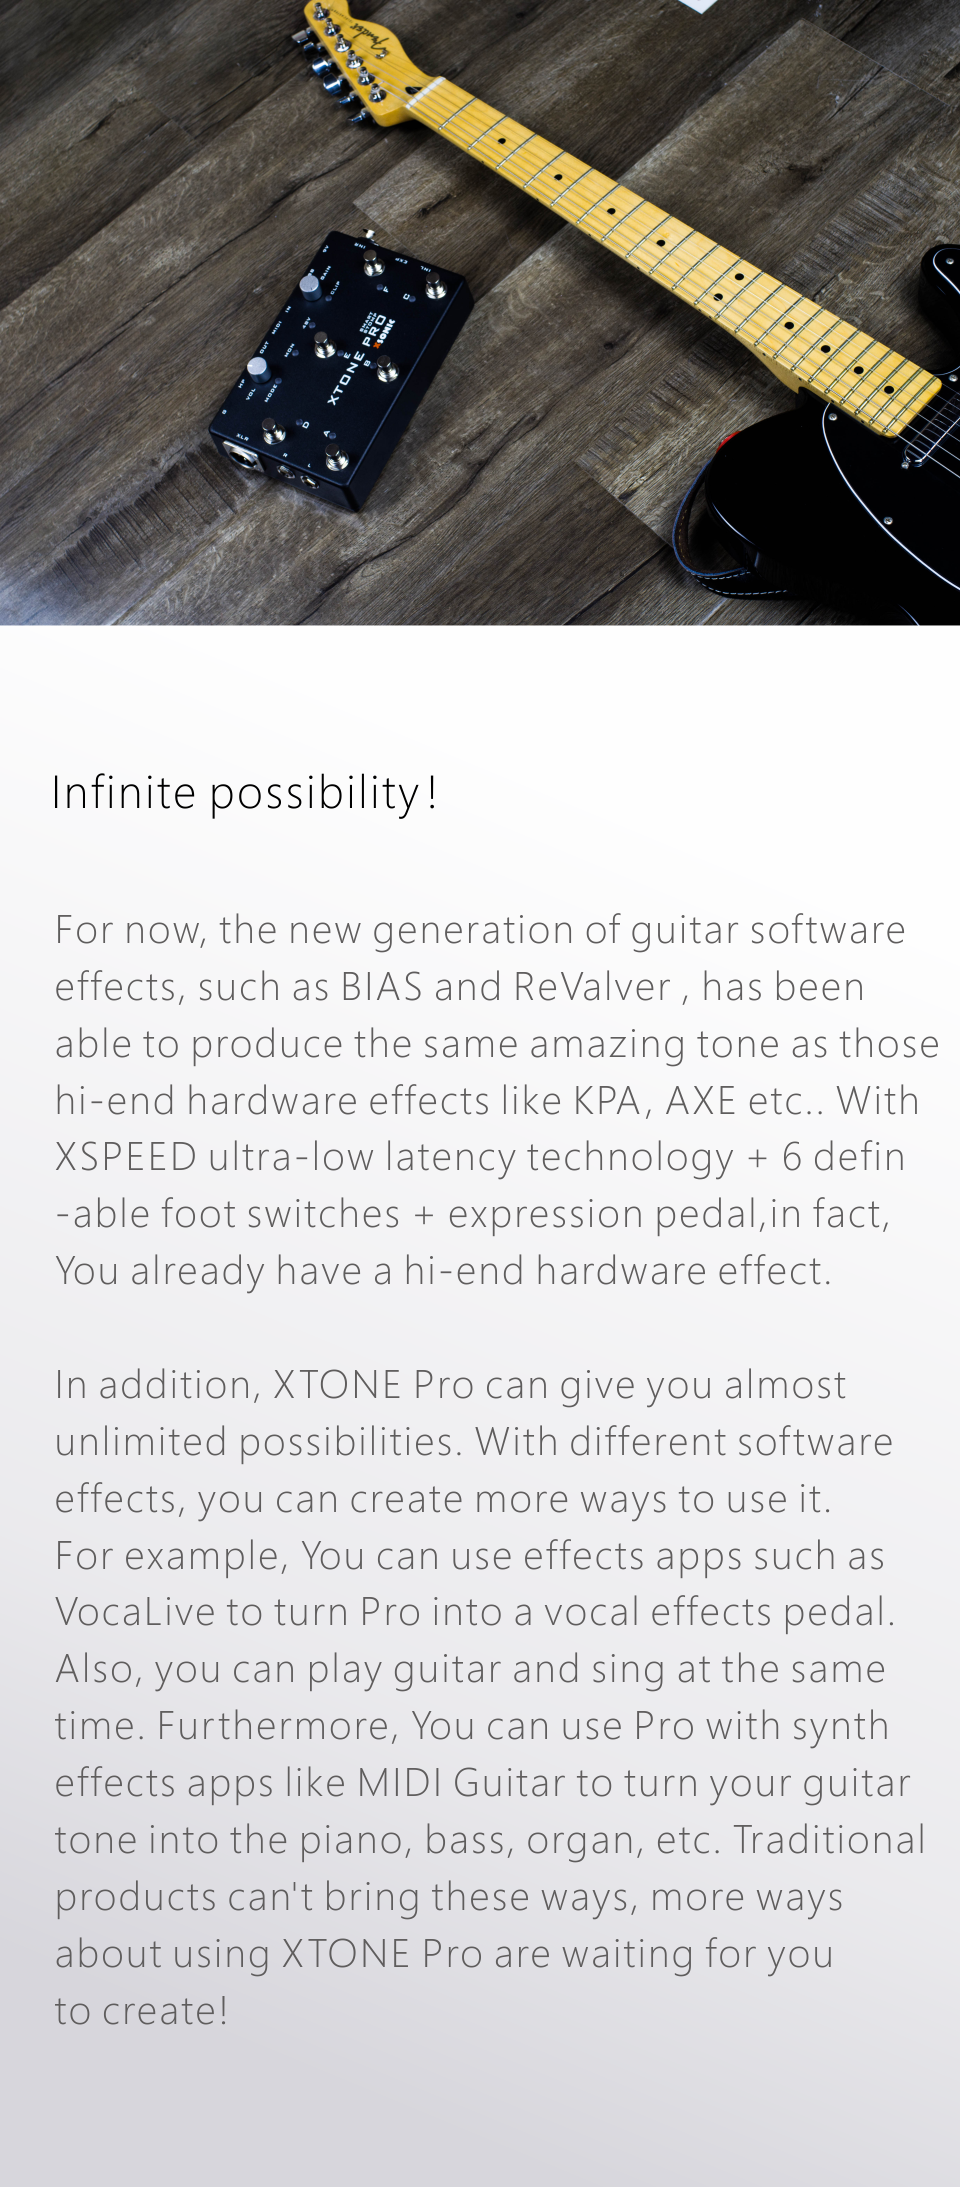 XTONE PRO 192K Professional Mobile Audio Interface With MIDI Controller for iphone/ipad/PC/MAC &amp; Ultra Low Latency